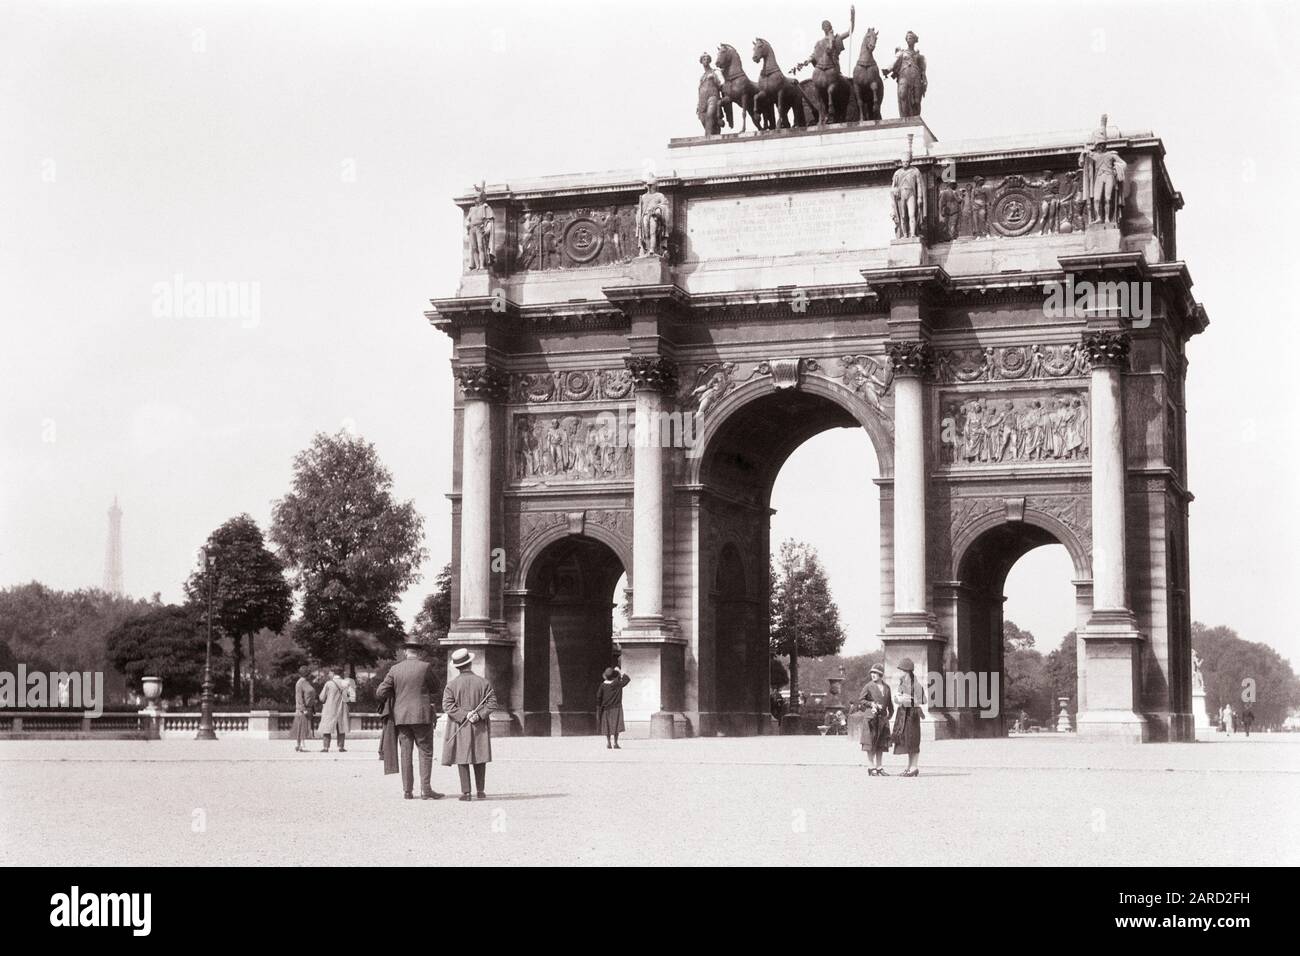 19s Arc De Triomphe Du Carrousel Near The Louvre And The Tuileries Eiffel Tower In Distance Paris France R1 Har001 Hars Near Tourists Cities Corinthian Tuileries Black And White Chariot Har001